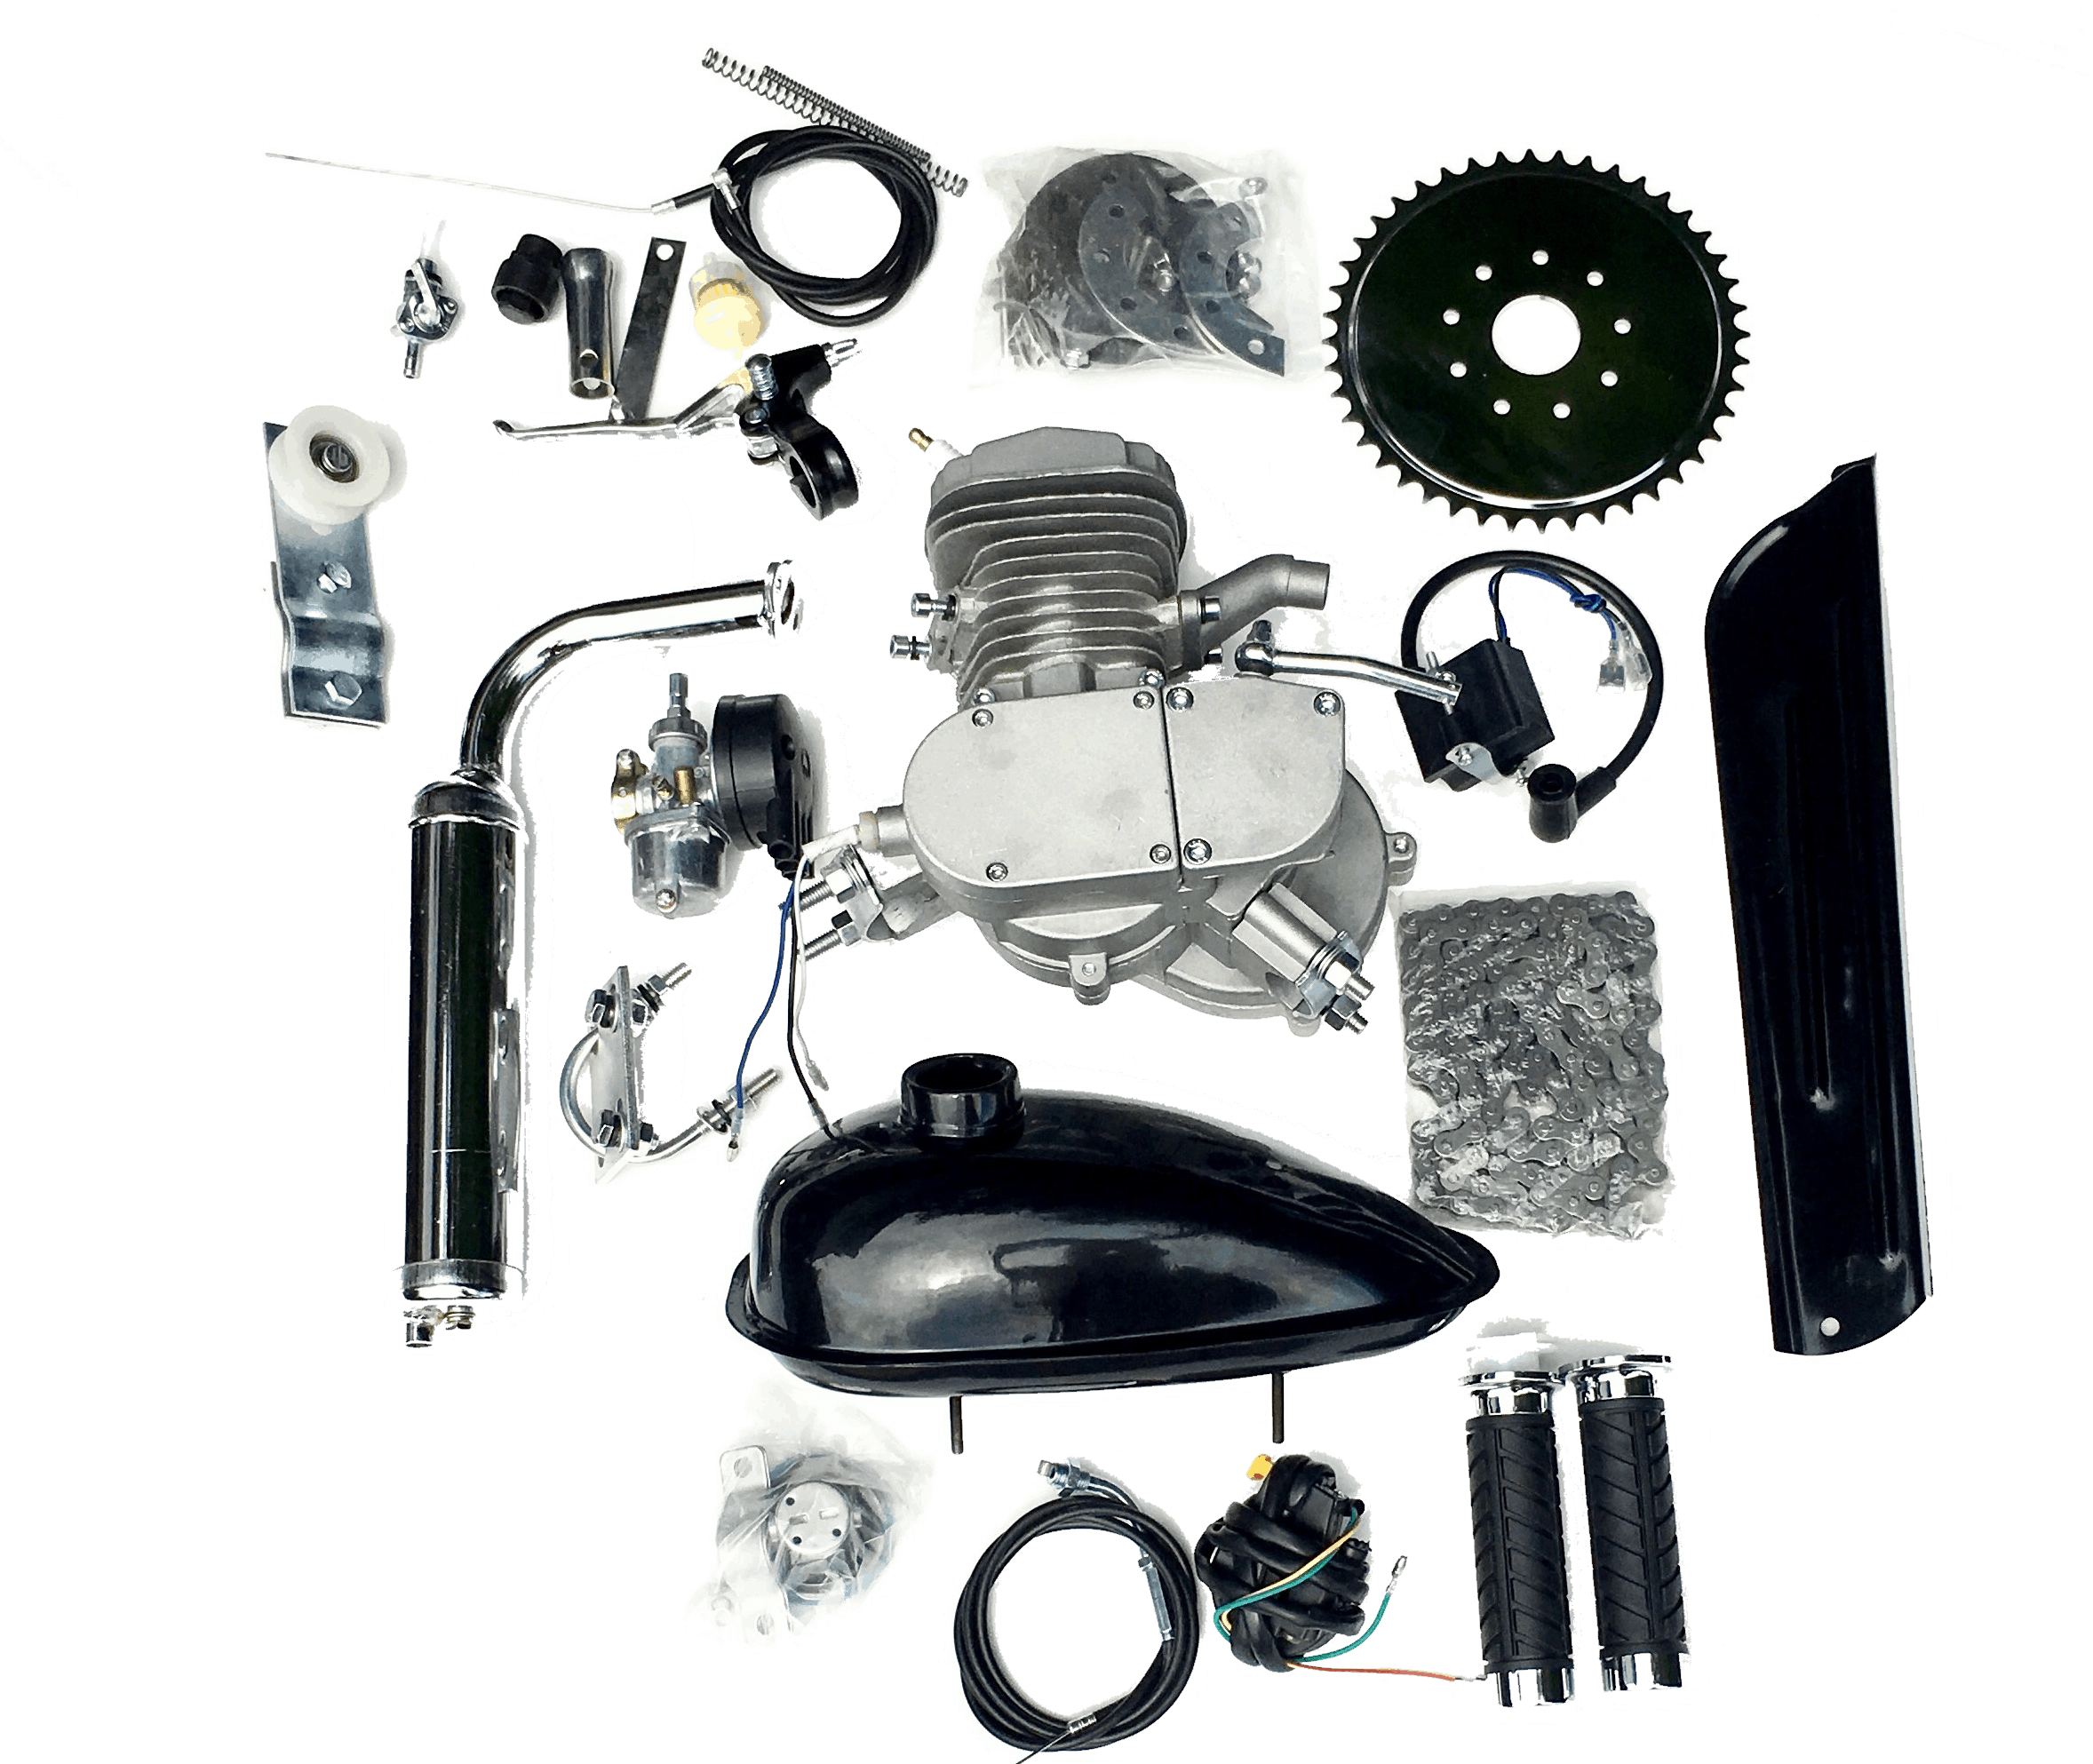 A group of parts that are laid out on the ground.